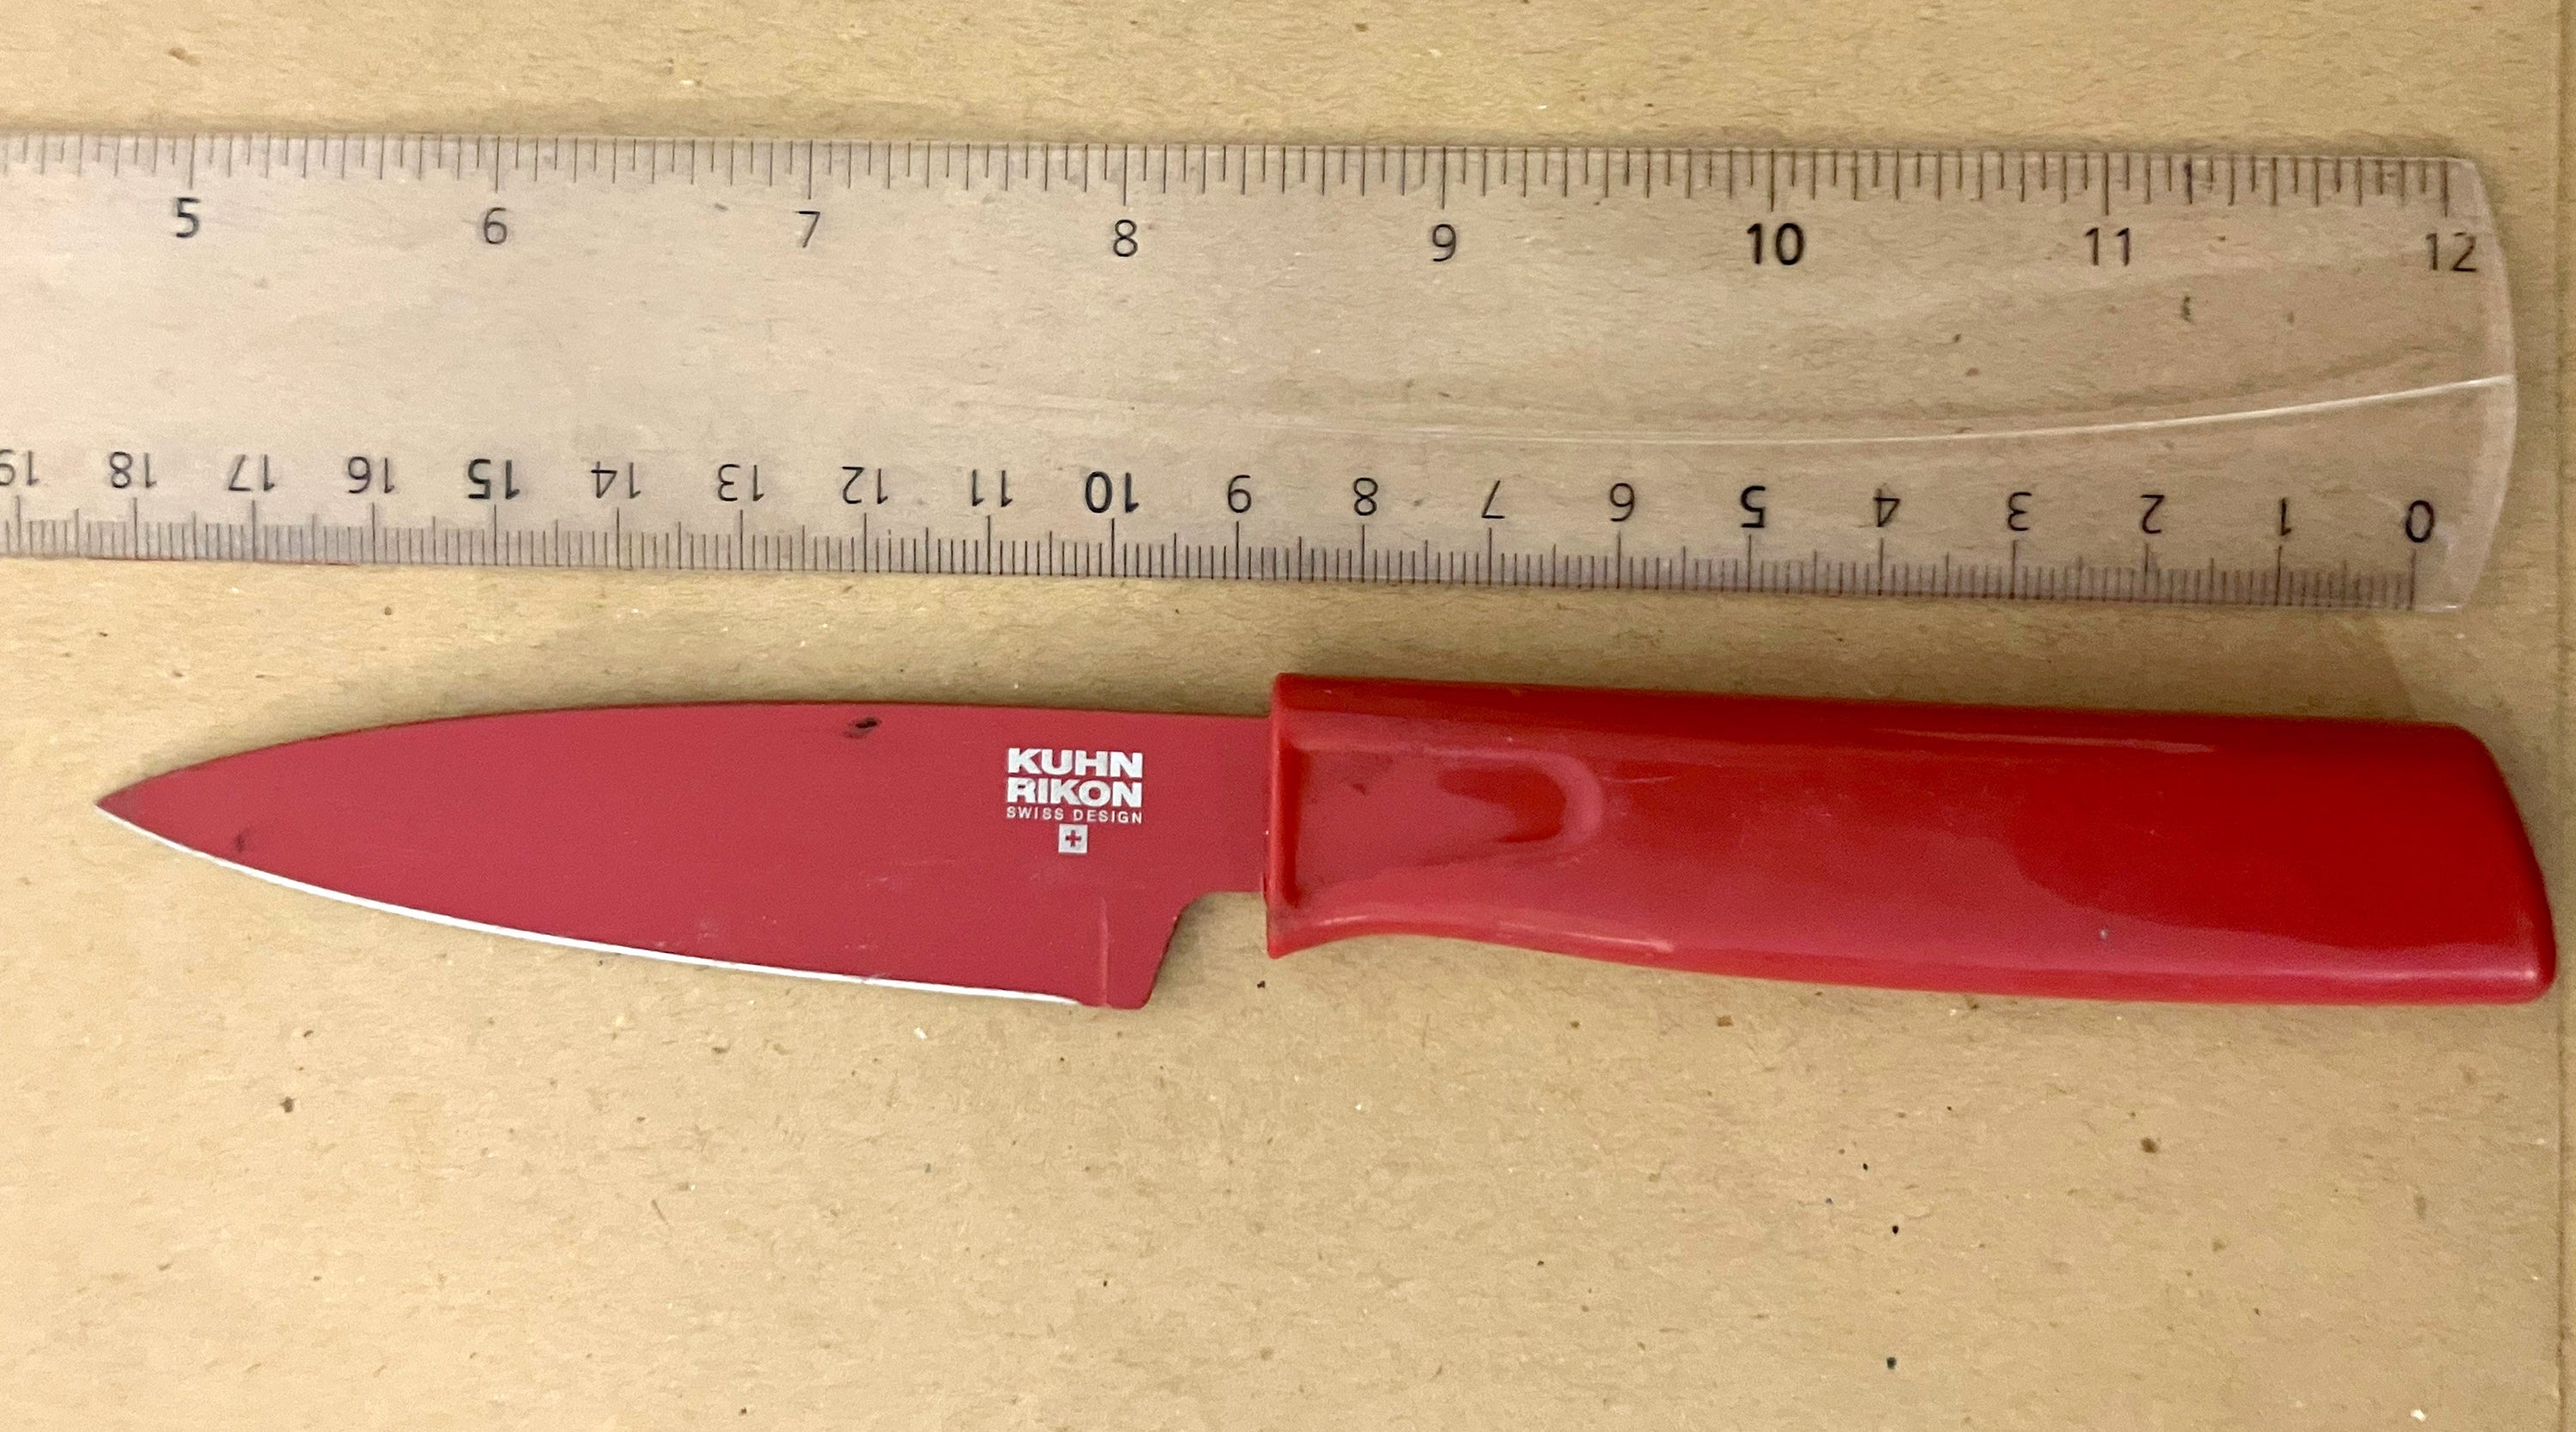 A knife used by Damien Byrnes, 36, from Tottenham, north London, to remove the penis of Marius Gustavson